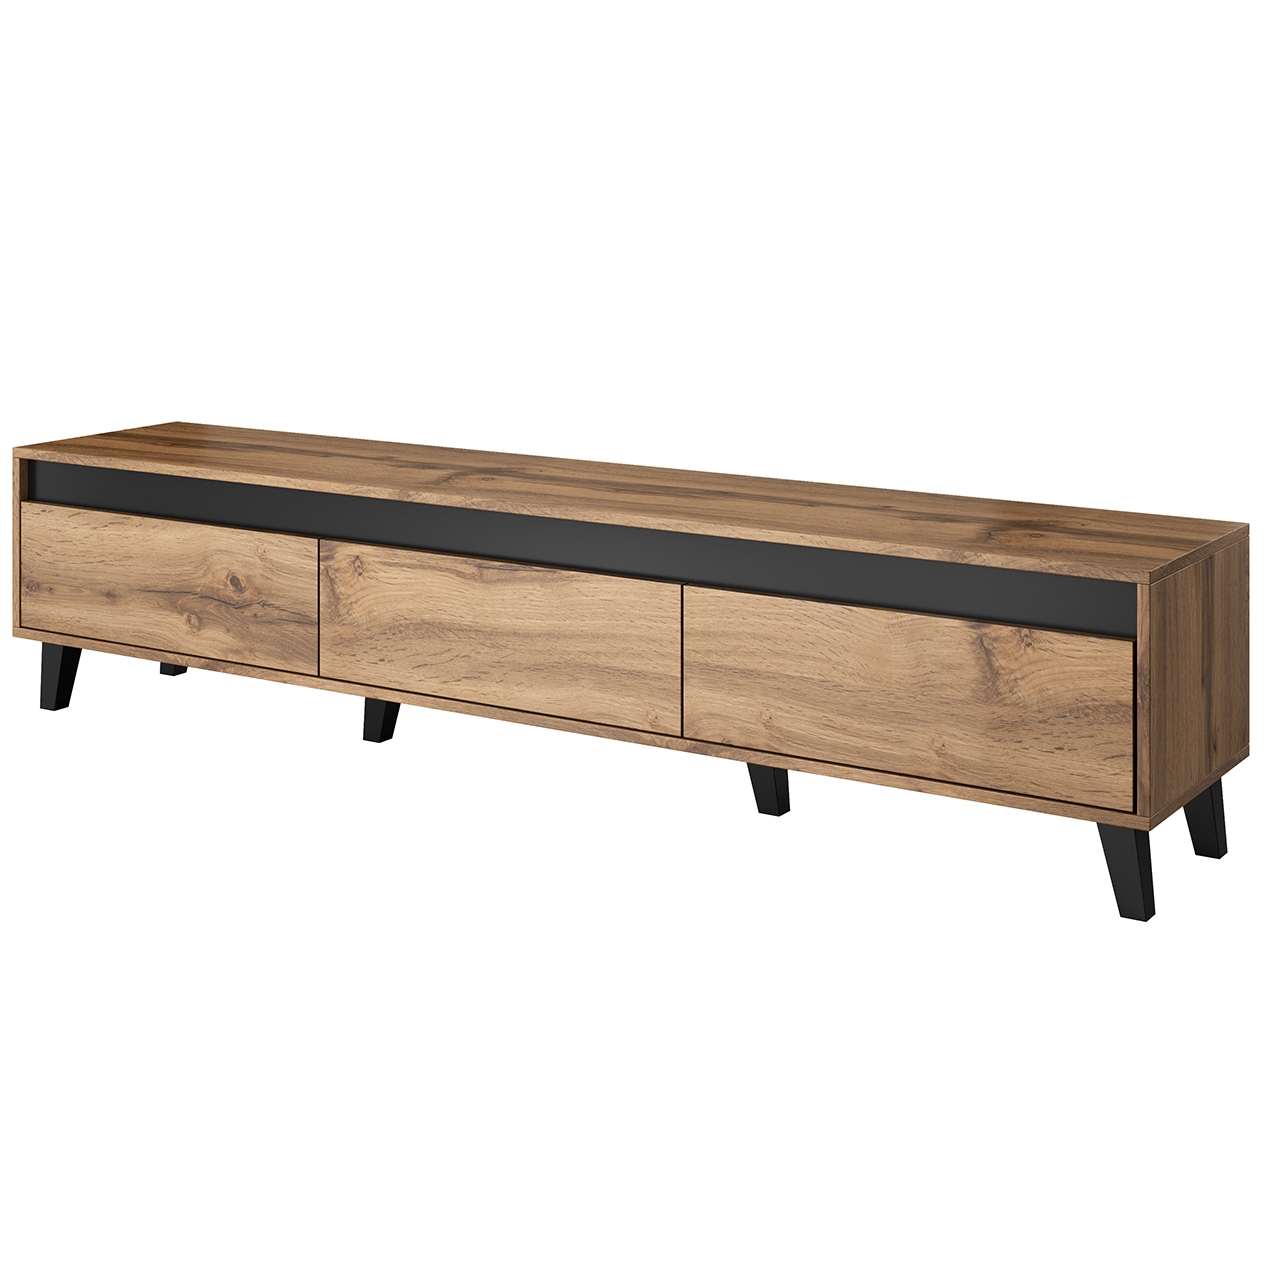 TV Stand NORD 185 wotan oak / anthracite